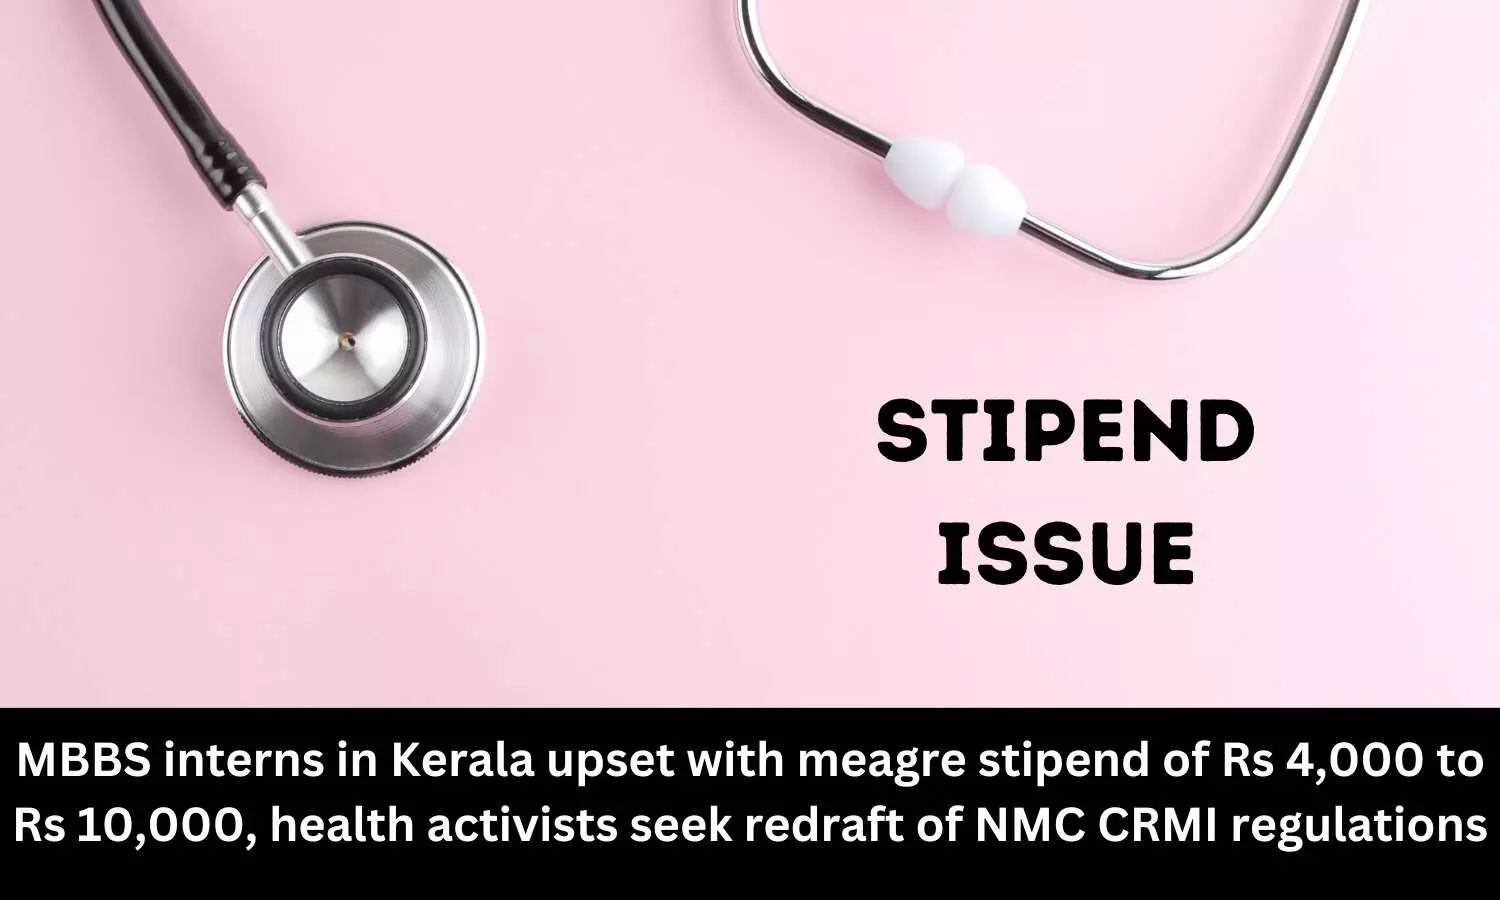 MBBS interns in Kerala upset with meagre stipend of Rs 4,000 to Rs 10,000, health activists seek redraft of NMC CRMI regulations